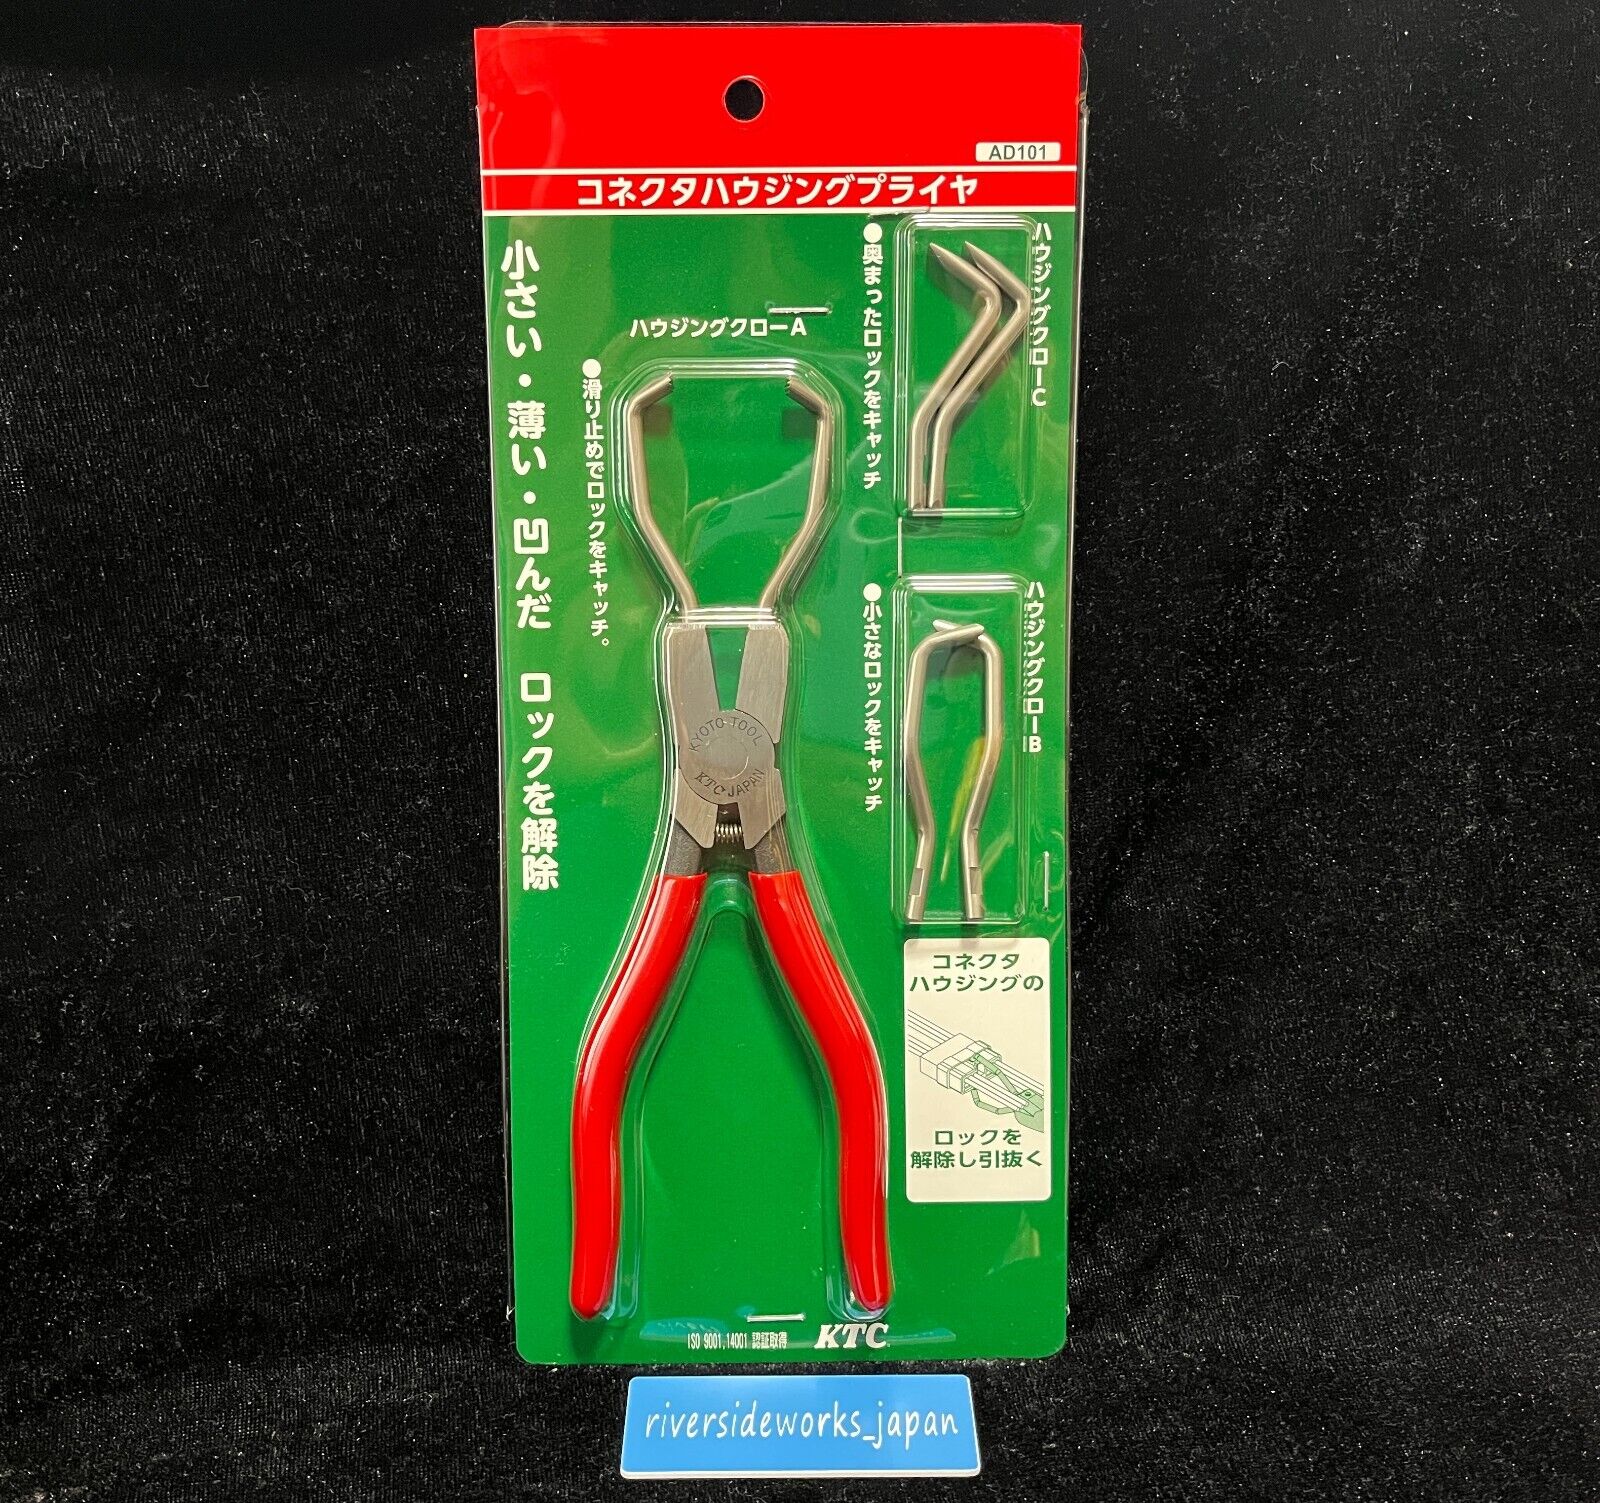 KTC Kyotokikaikogu Connector Housing Pliers AD101 AD101 Red NEW from Japan